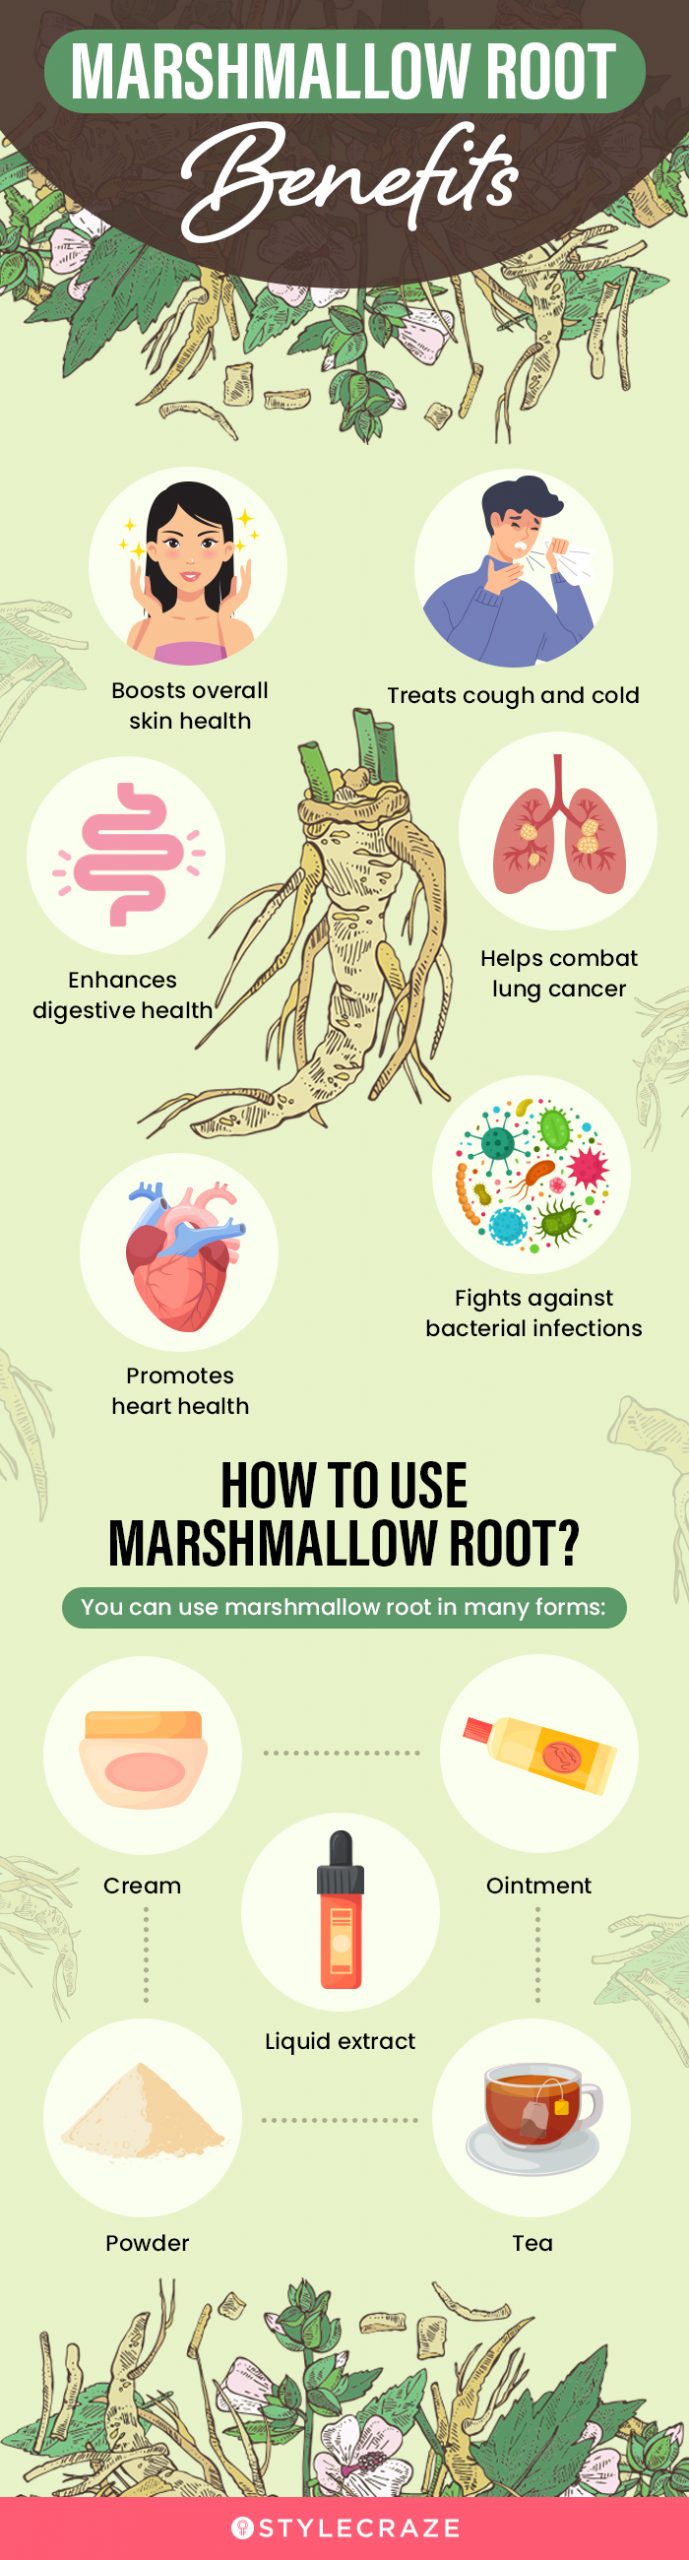 marshmallow root benefits (infographic)